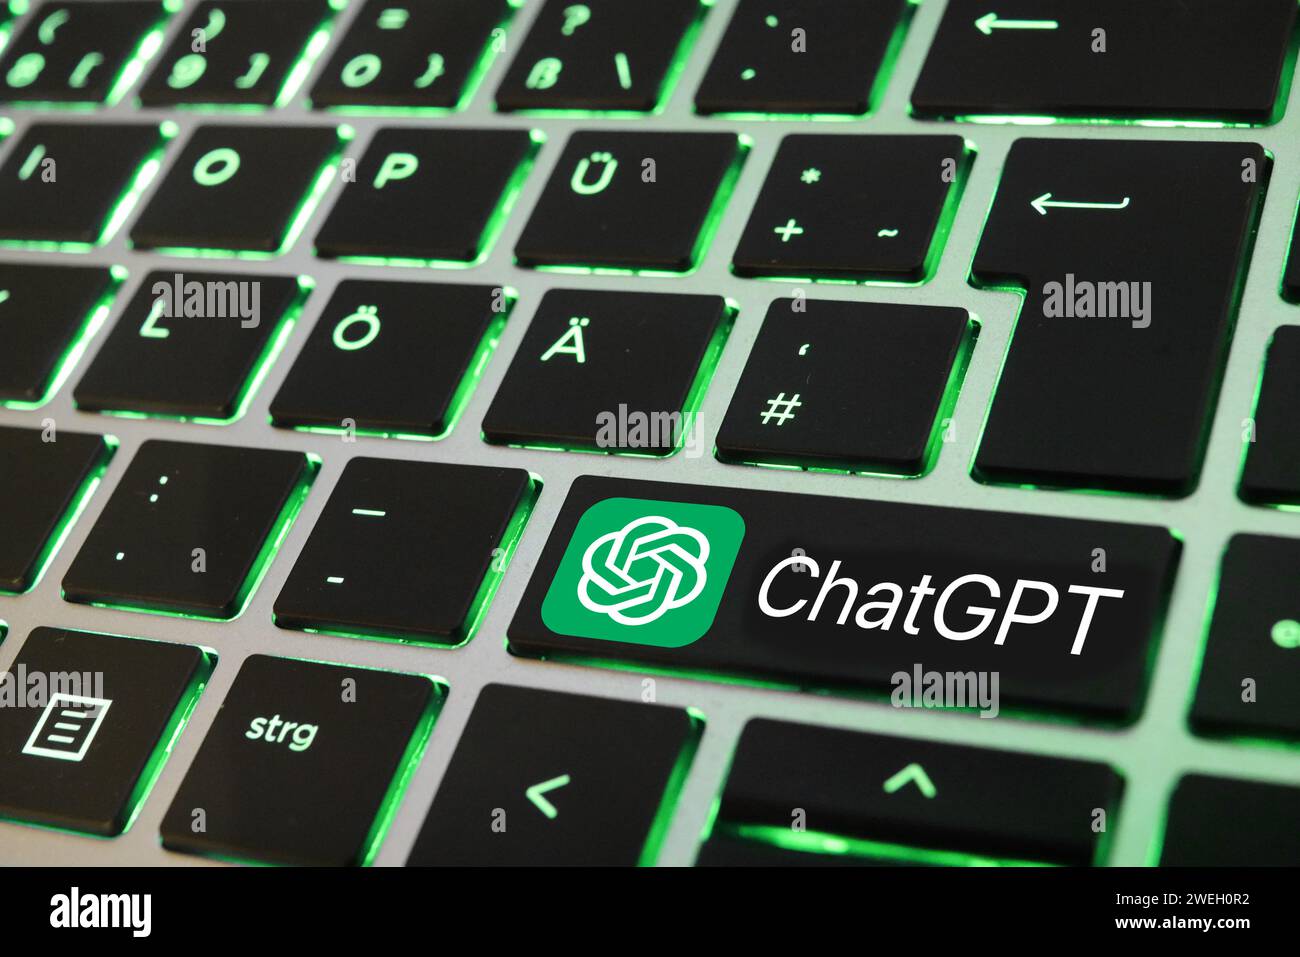 PHOTO MONTAGE! - Artificial Intelligence. Close-up of a laptop keyboard with ChatGPT key Stock Photo